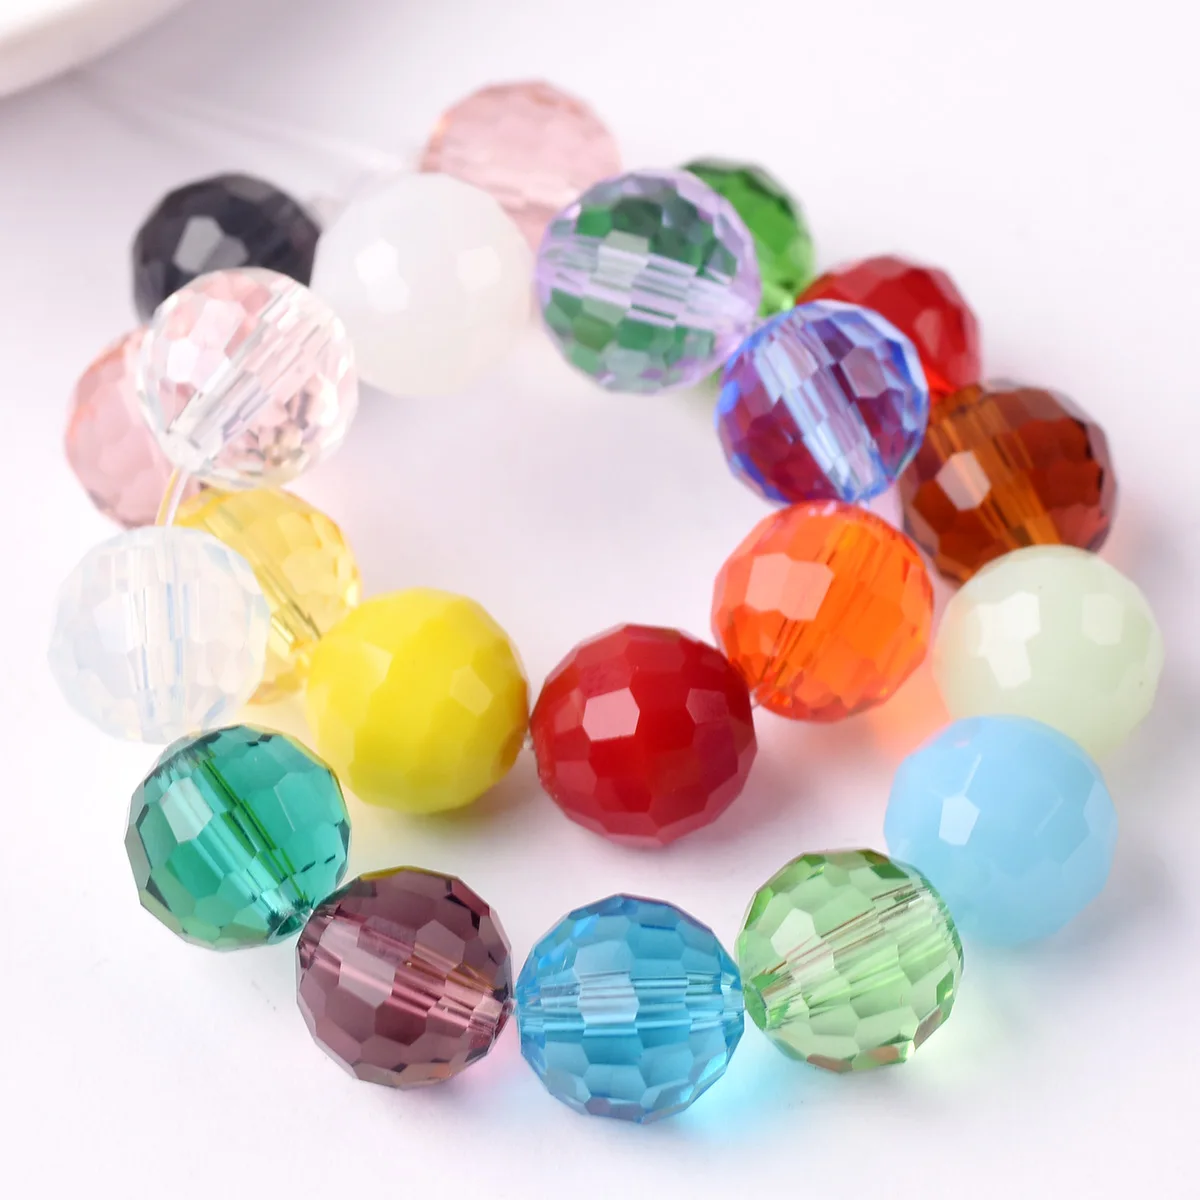 50pcs mixed colorful round polymer clay loose beads 6mm 8mm 10mm 12mm wholesale bulk lot for jewelry making diy bracelet Round 96 Facets 6mm 8mm 10mm 12mm Faceted Crystal Glass Loose Spacer Beads Wholesale Bulk Lot For Jewelry Making Findings